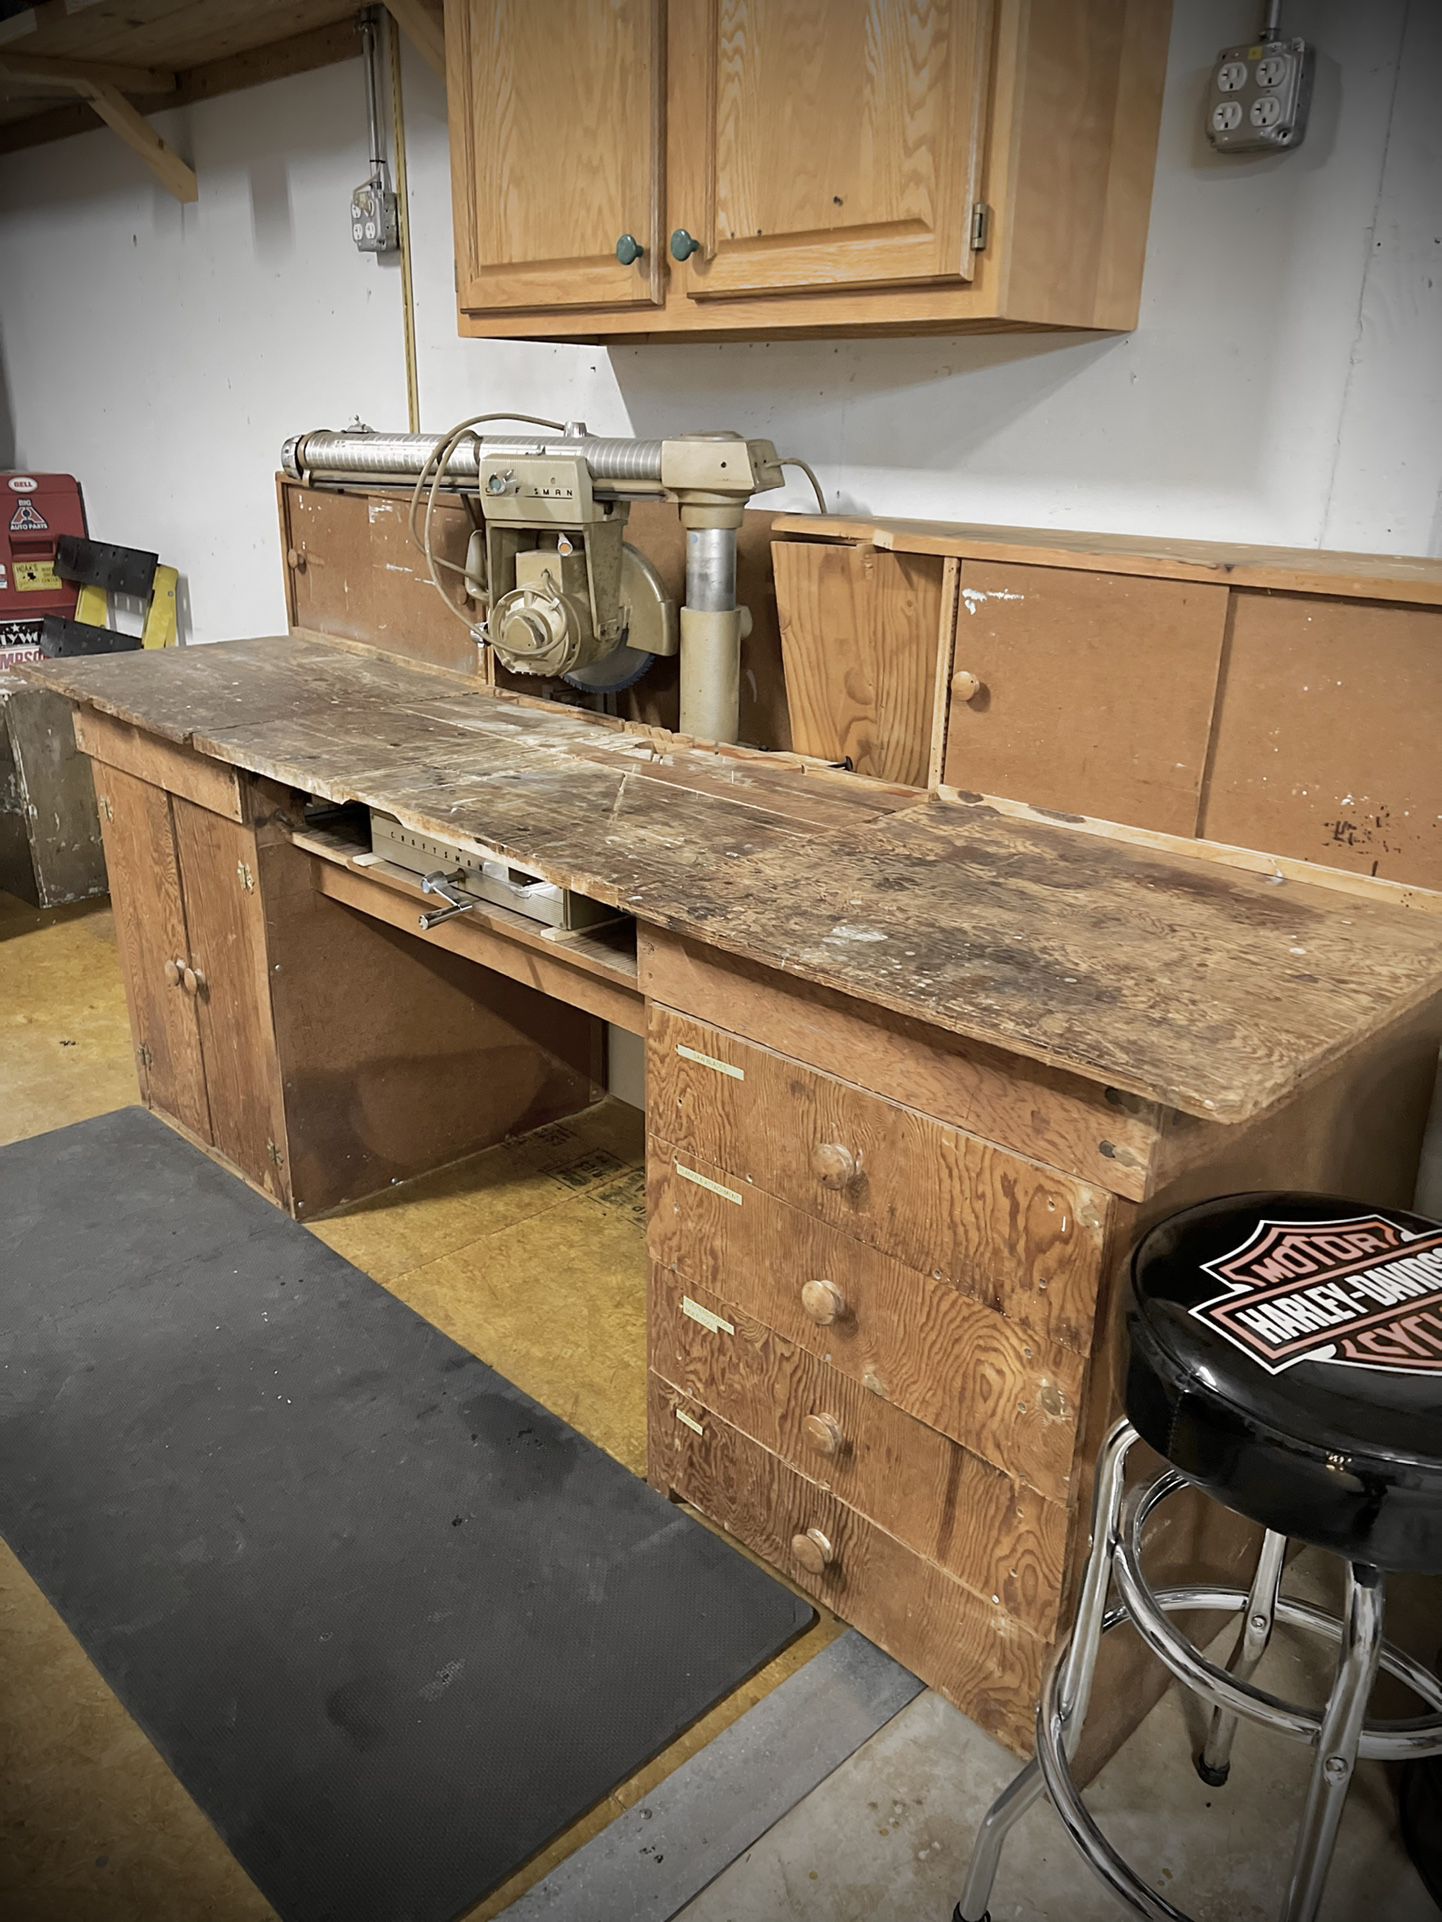 Craftsman Radial Arm Saw And Table / Cabinet